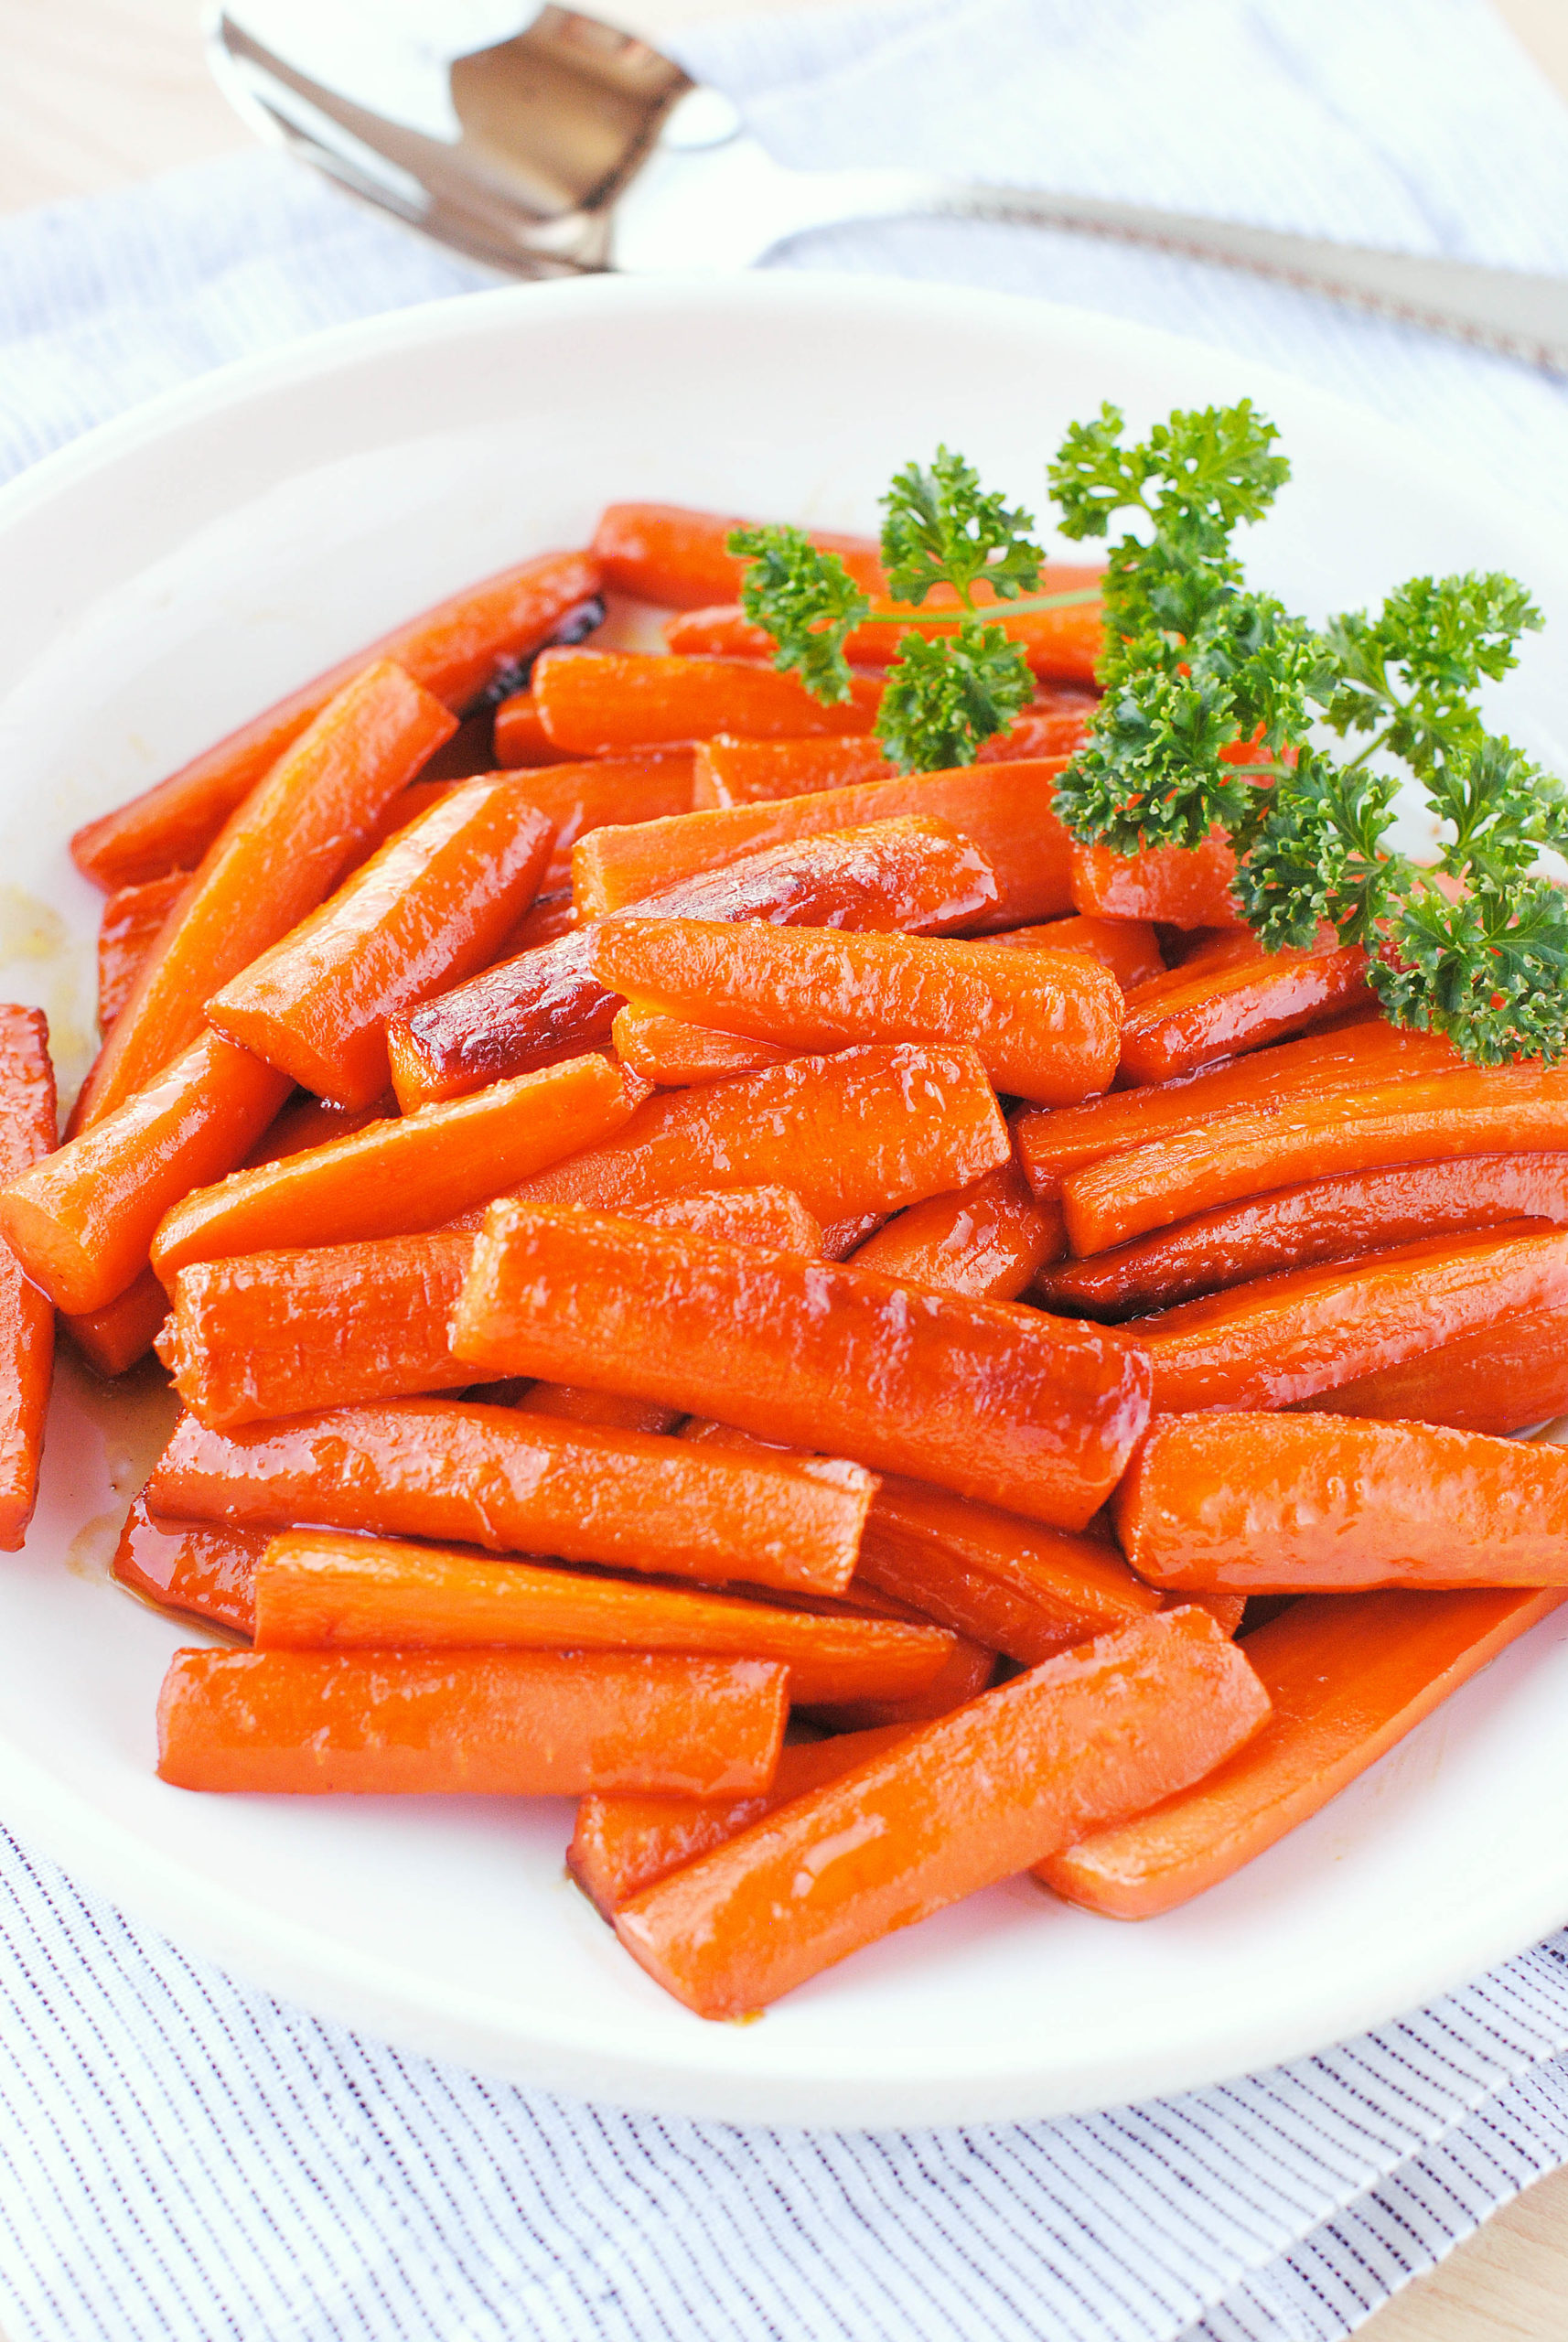 Glazed Carrots - super simple to make. Cook the carrots in a little butter, sprinkle with salt, then finish with a bit of brown sugar.